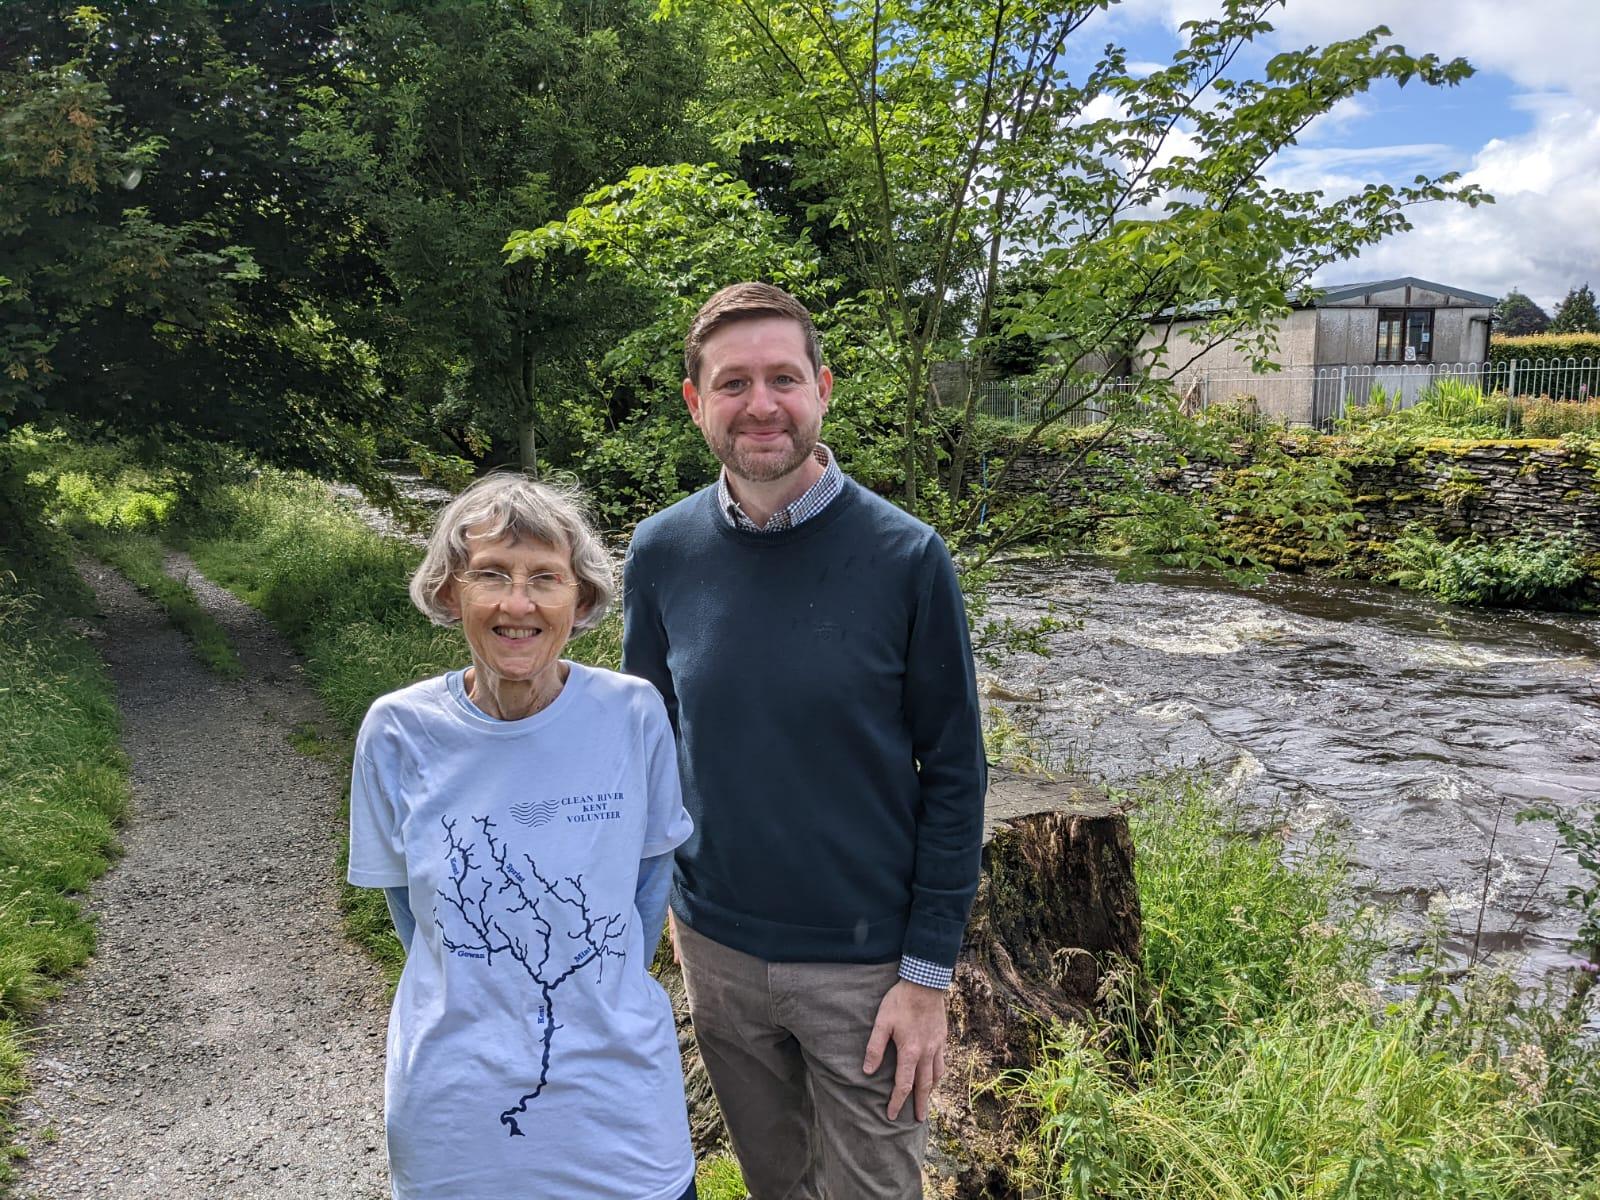 Virginia Branney and Jim McMahon MP at Staveley on Sat 29th June 2022